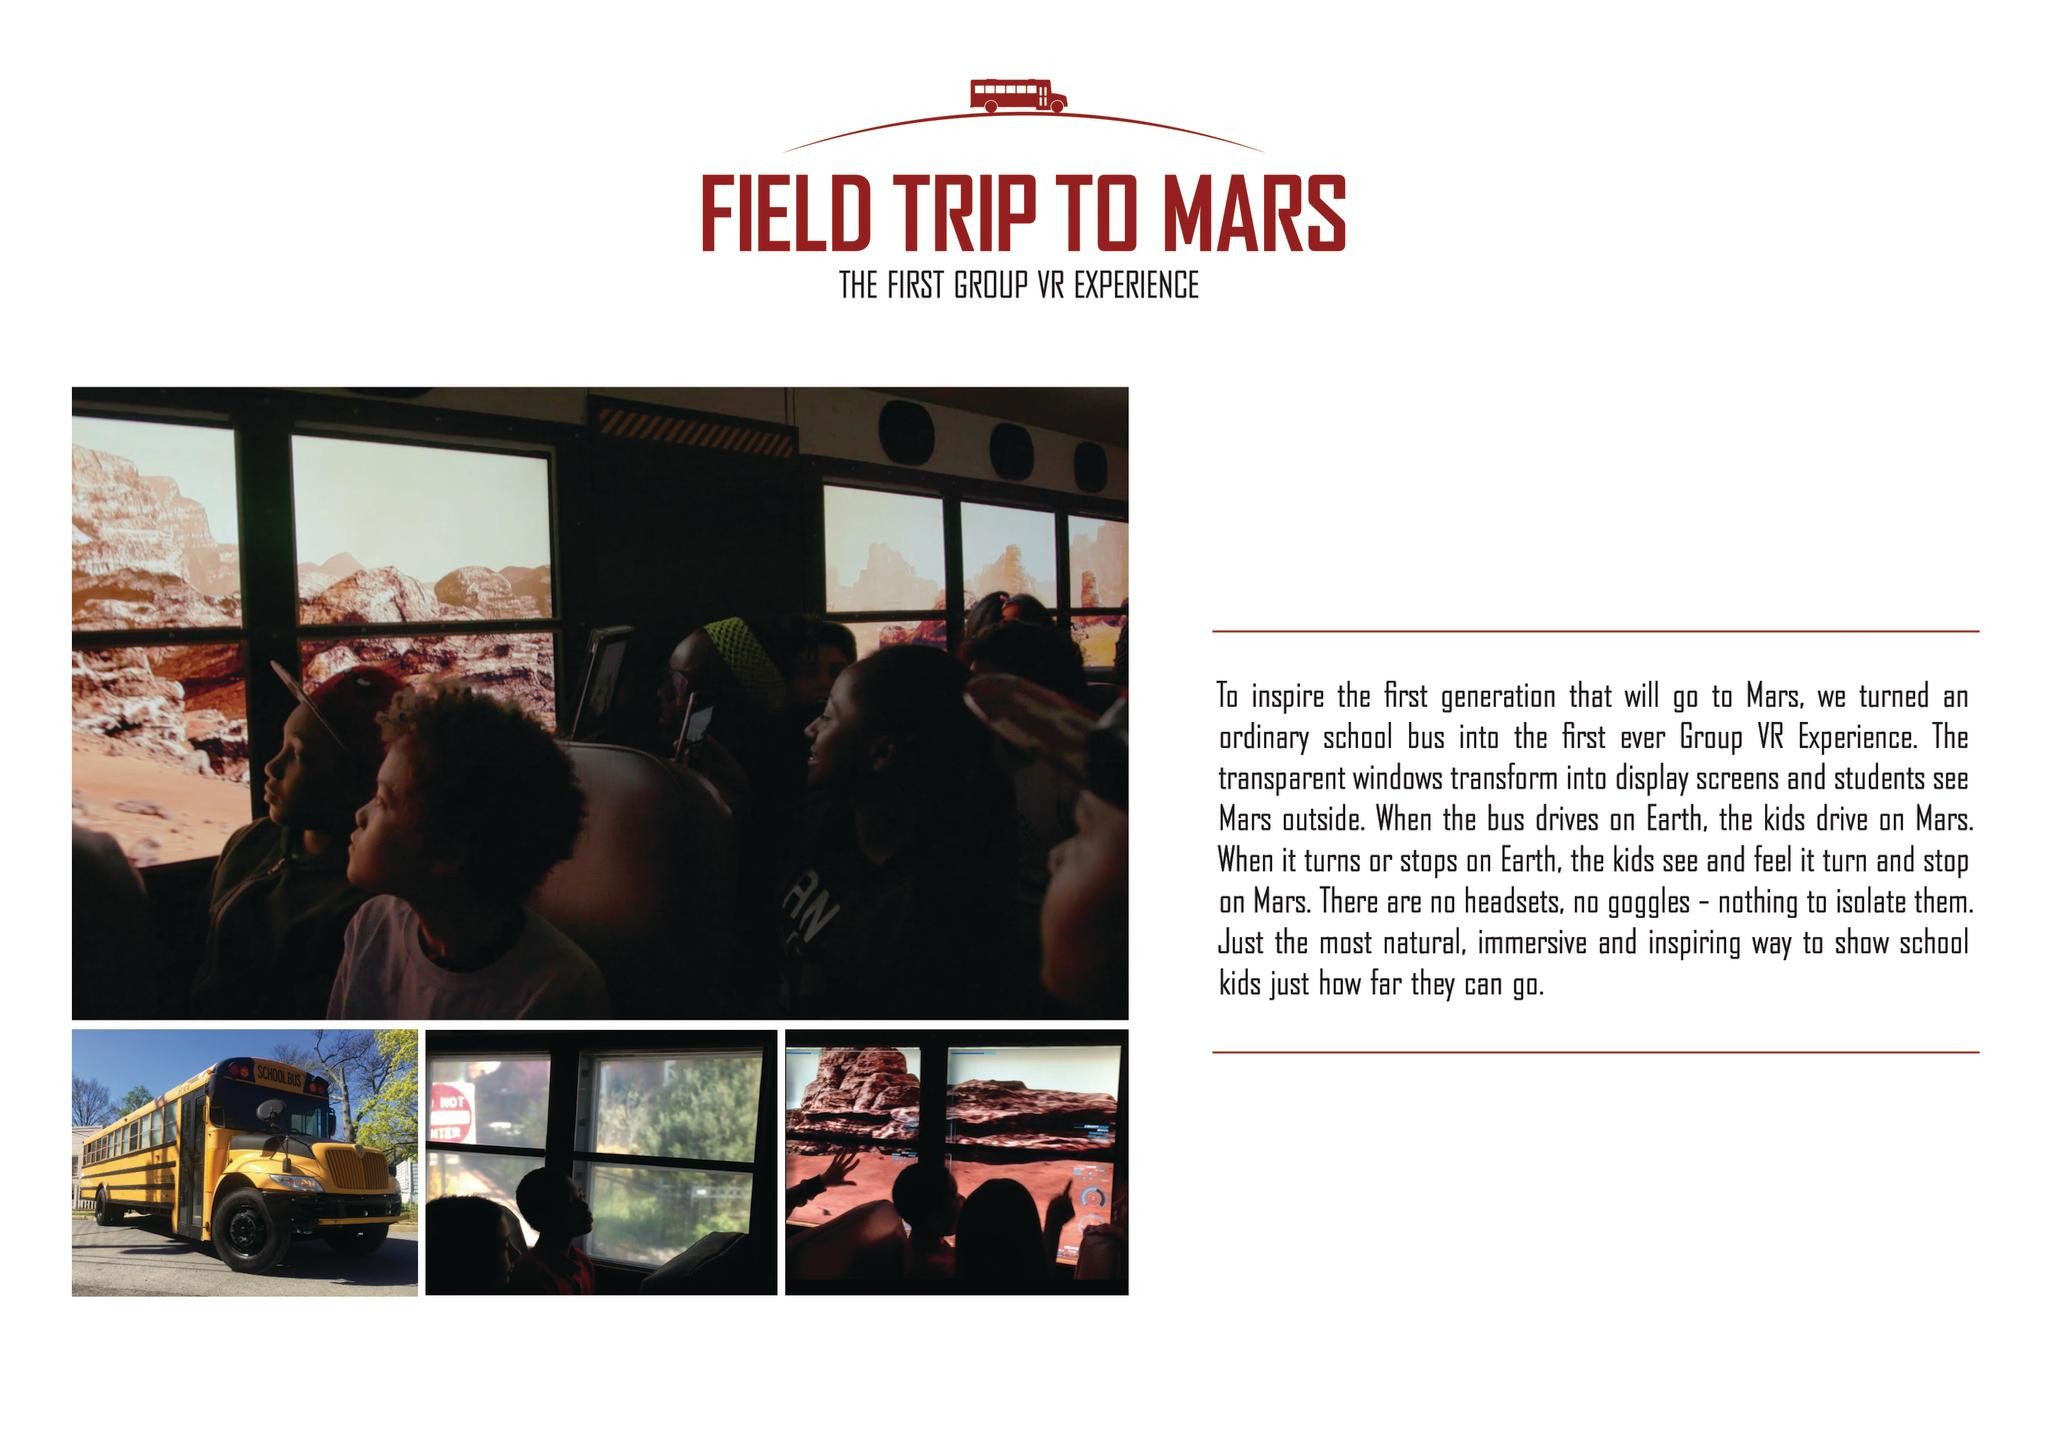 THE FIELD TRIP TO MARS